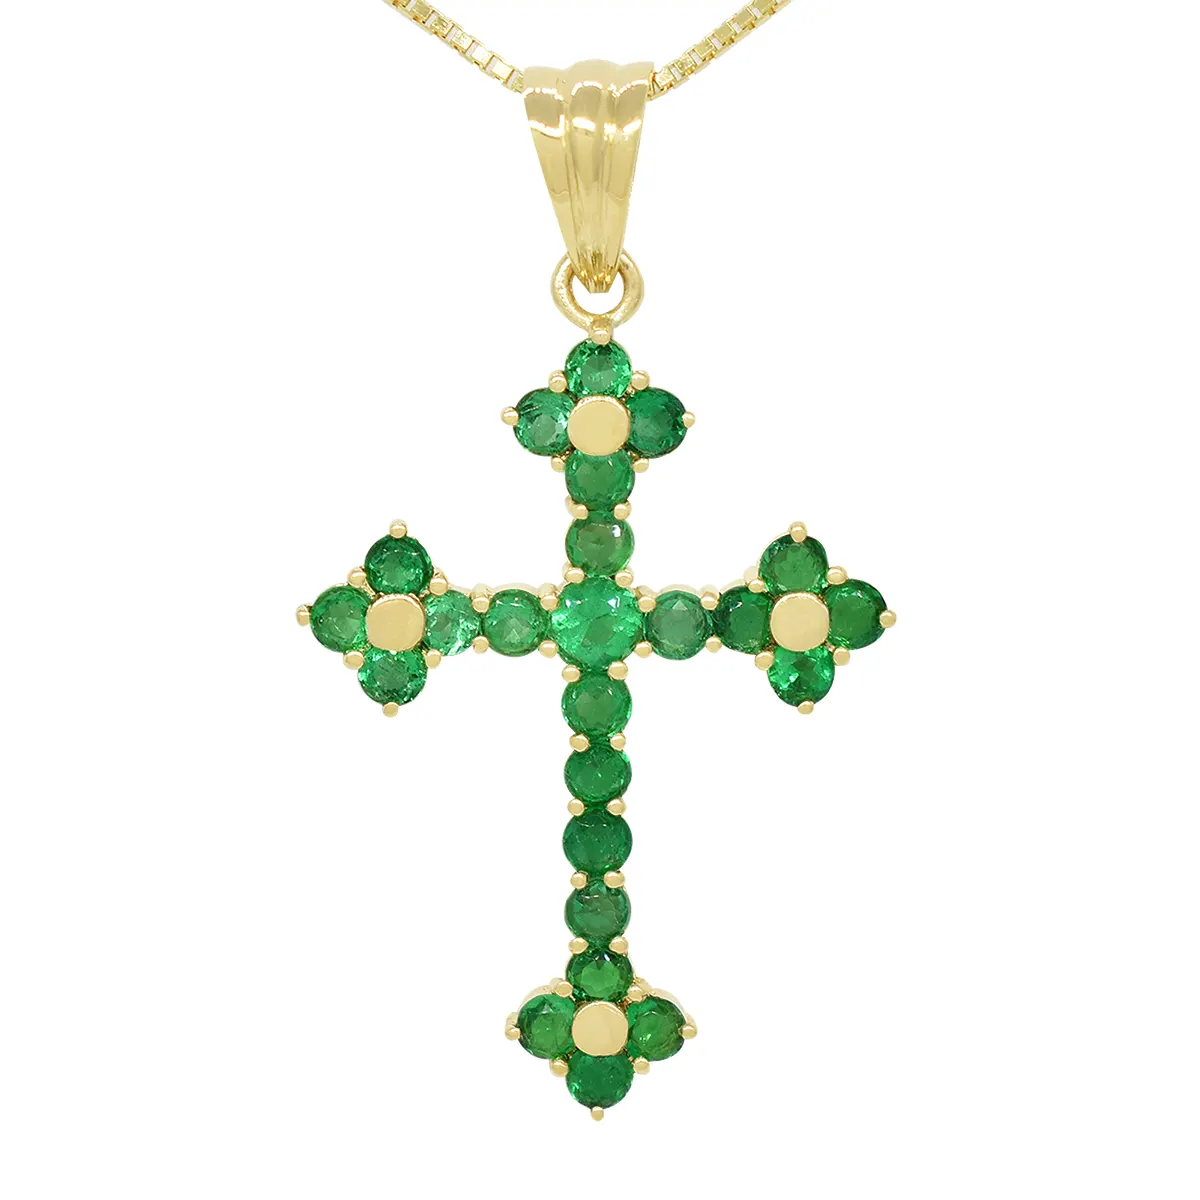 Cross Emerald Pendant in 18K Yellow Gold with 24 Round Cut Emeralds